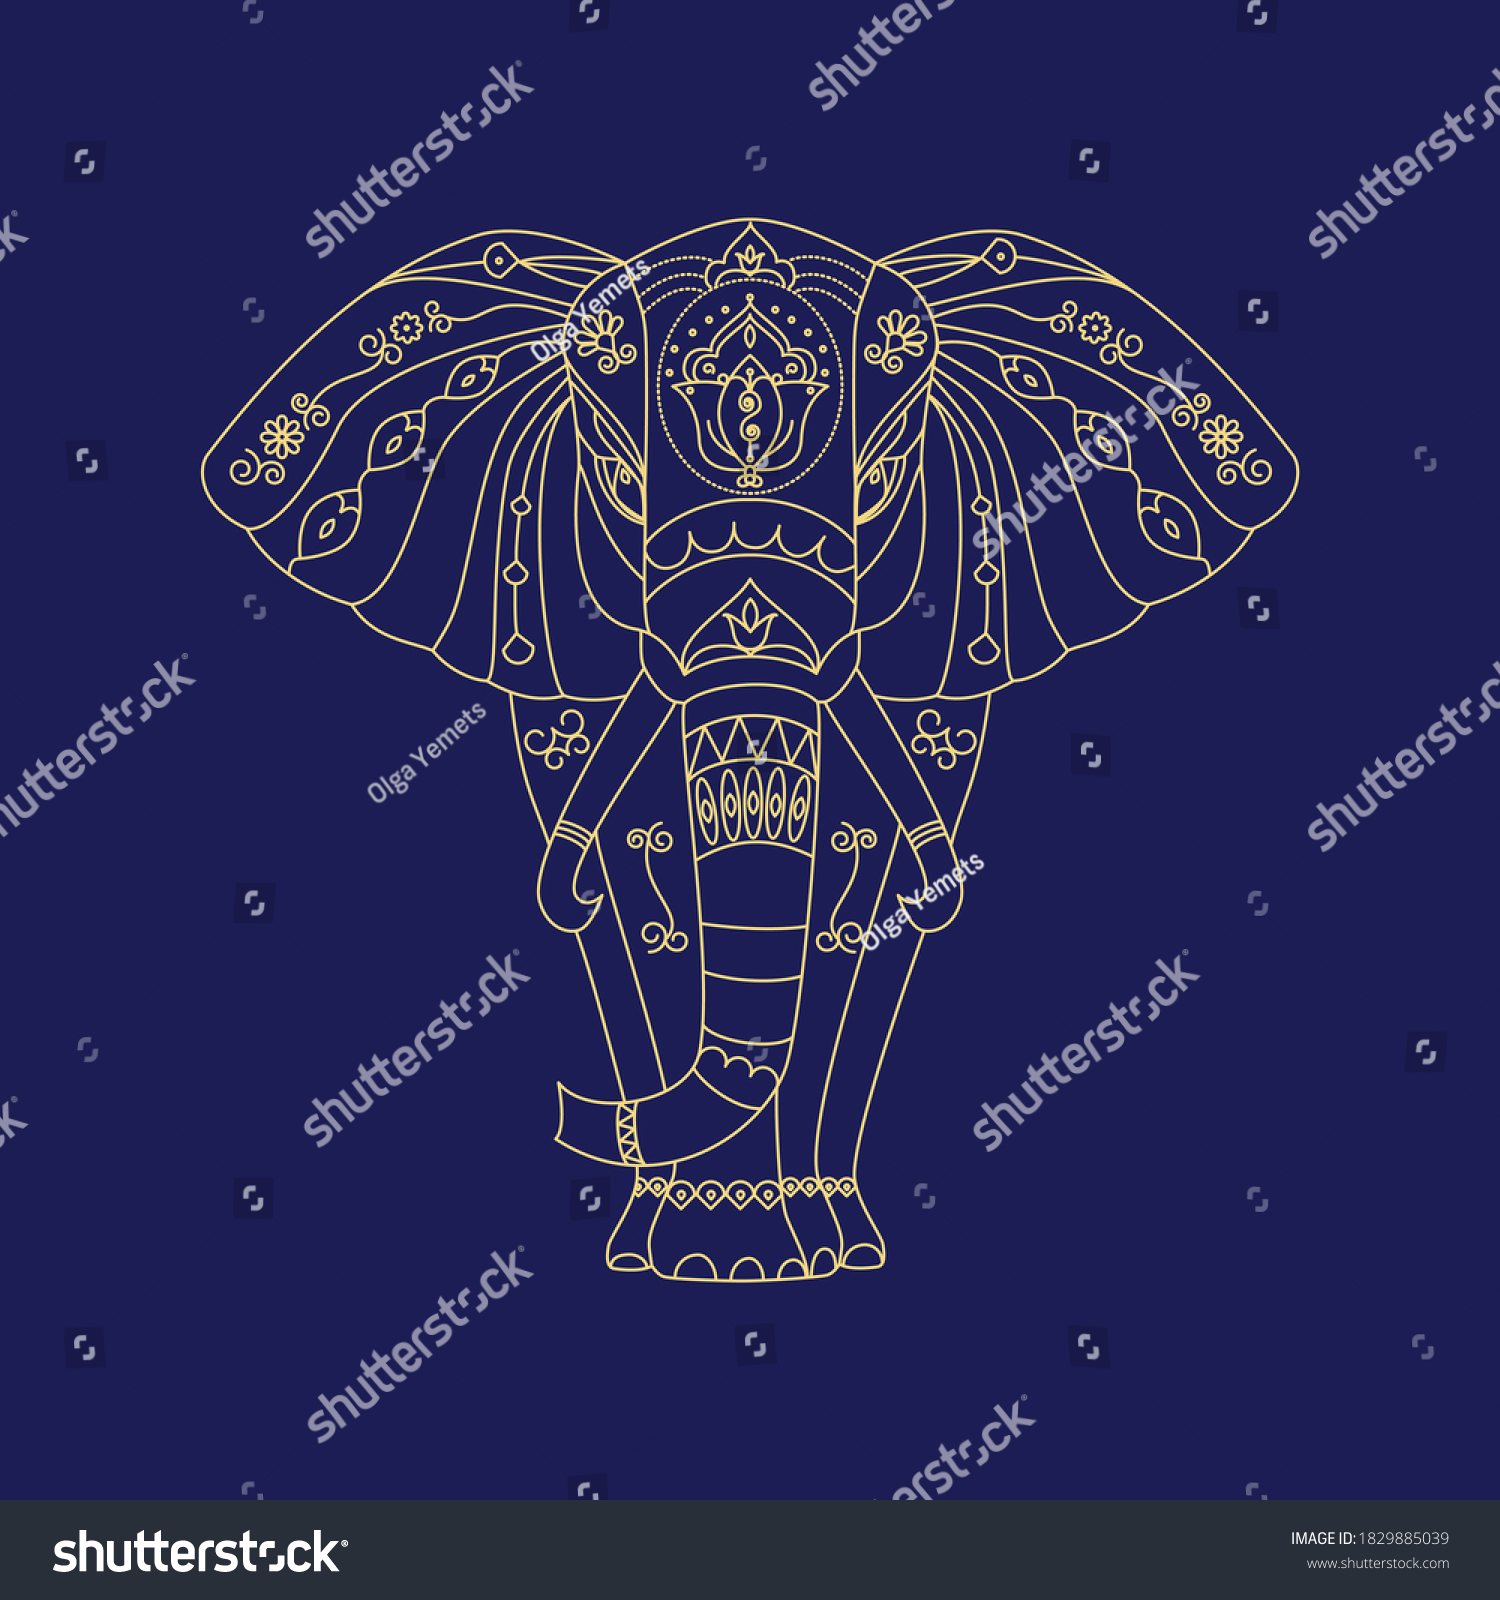 SVG of A decorative image of an elephant to illustrate an Indian theme. svg